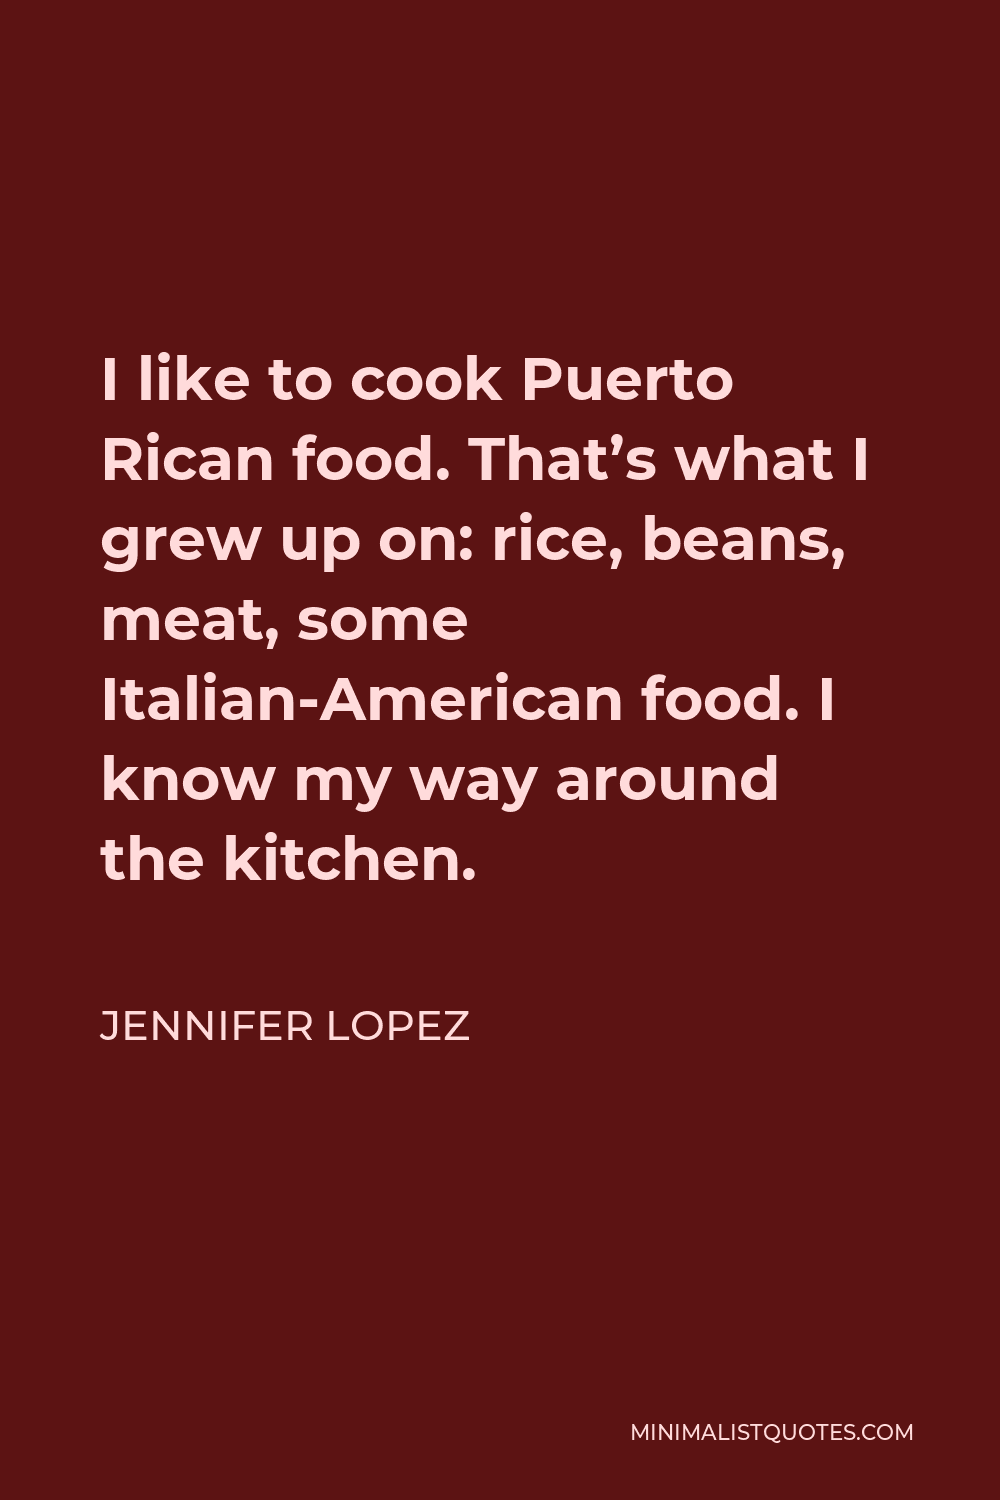 Jennifer Lopez Quote - I like to cook Puerto Rican food. That’s what I grew up on: rice, beans, meat, some Italian-American food. I know my way around the kitchen.